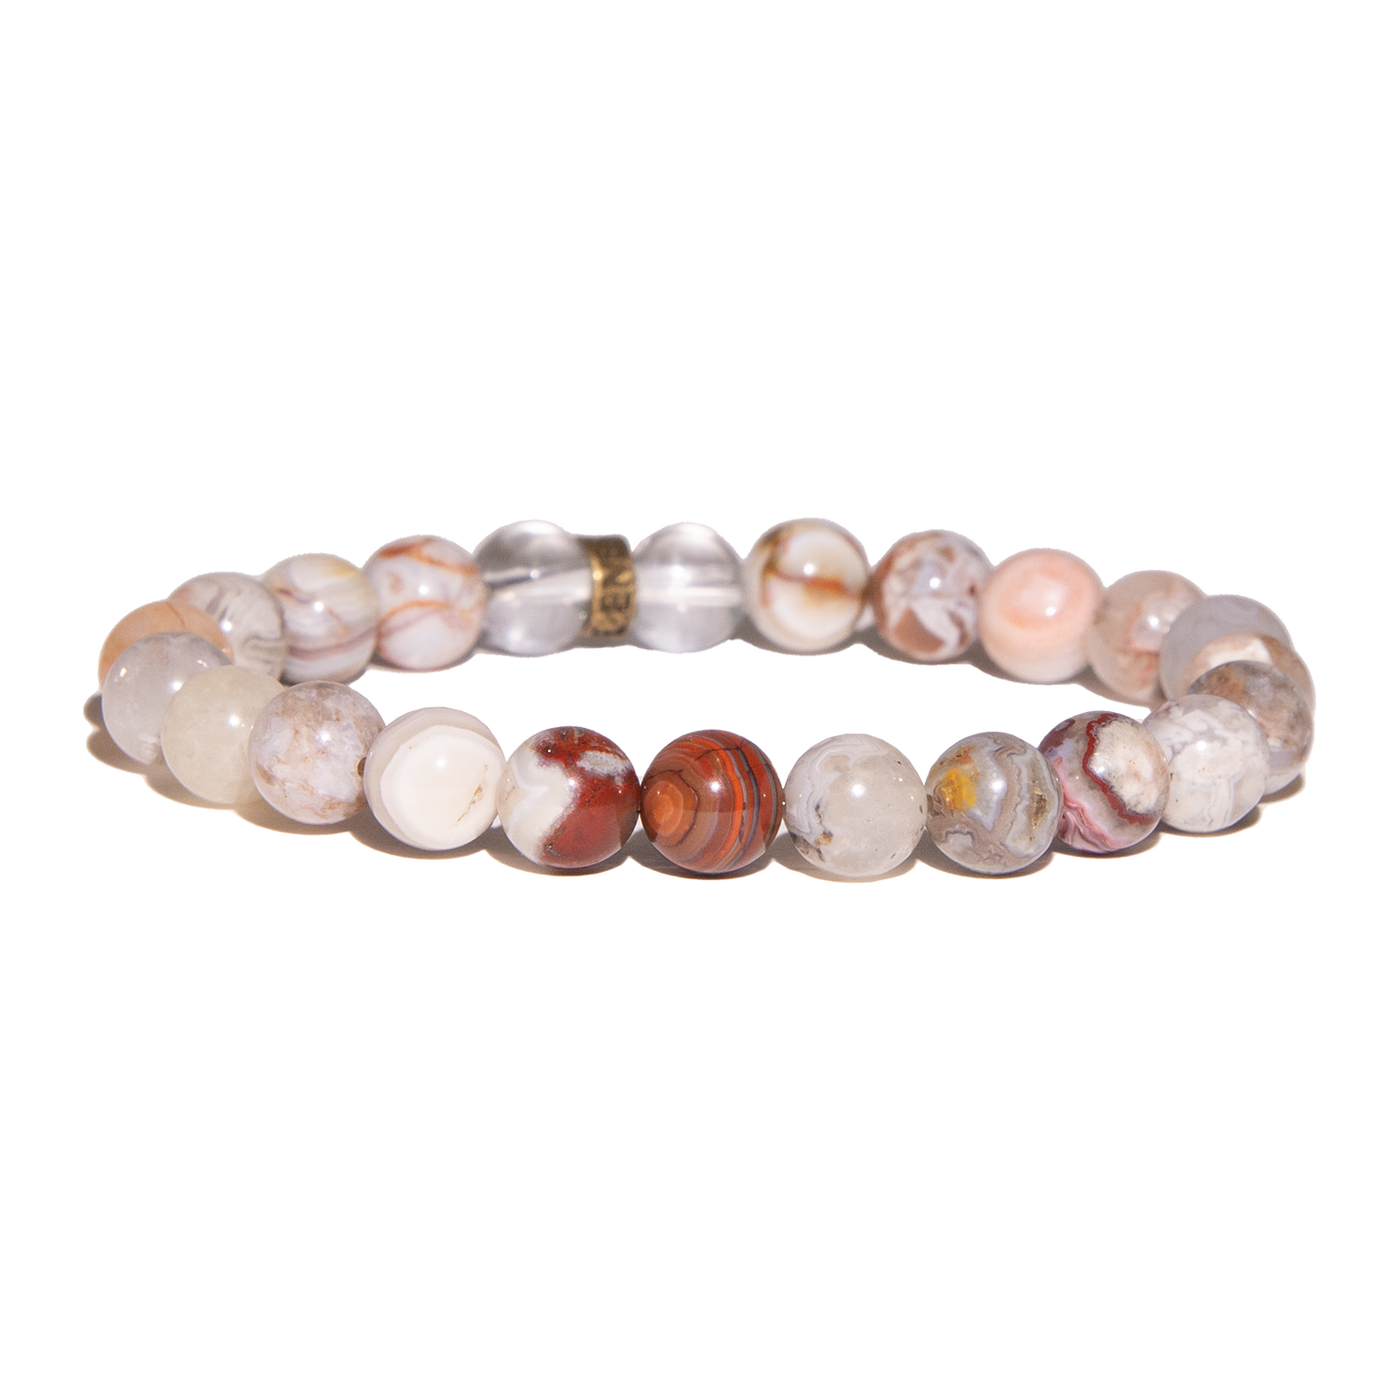 close up view of mexican laguna lace agate crystal stretch bracelet by Energy Muse